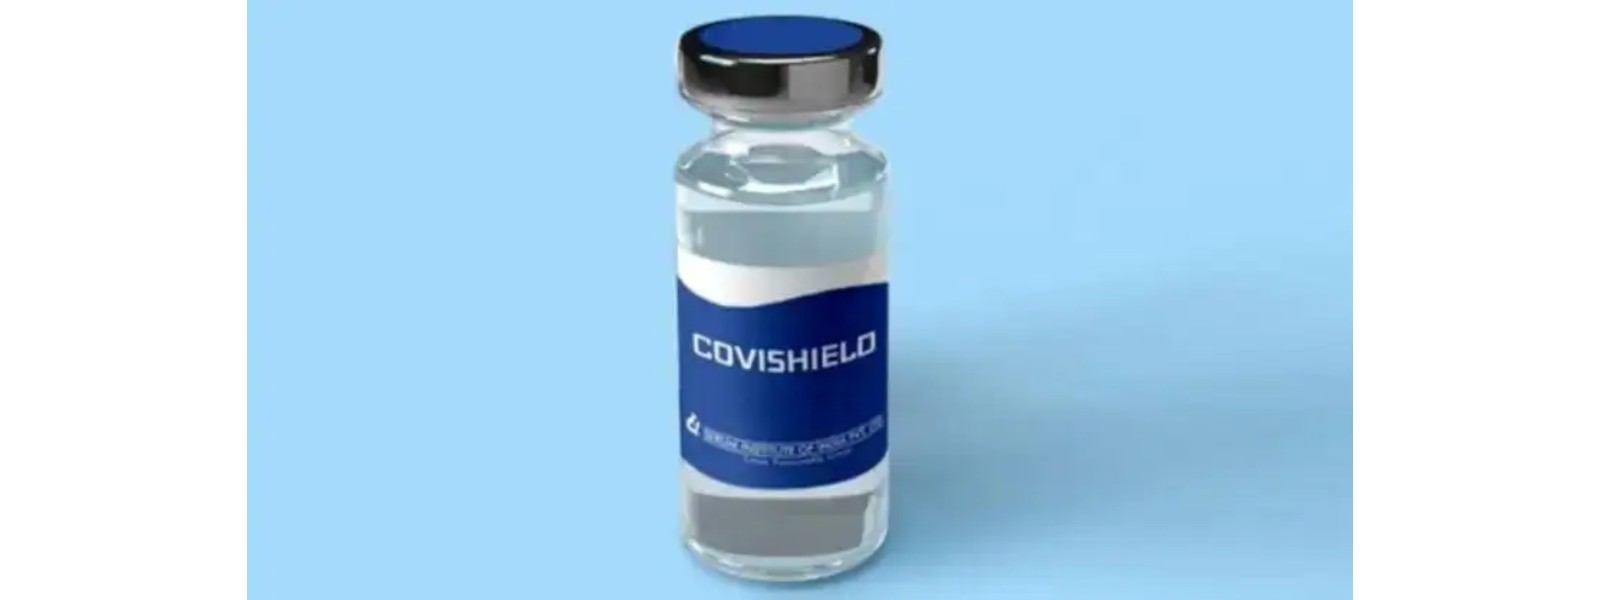 21,147 people jabbed with the Covishield on Wednesday (03)